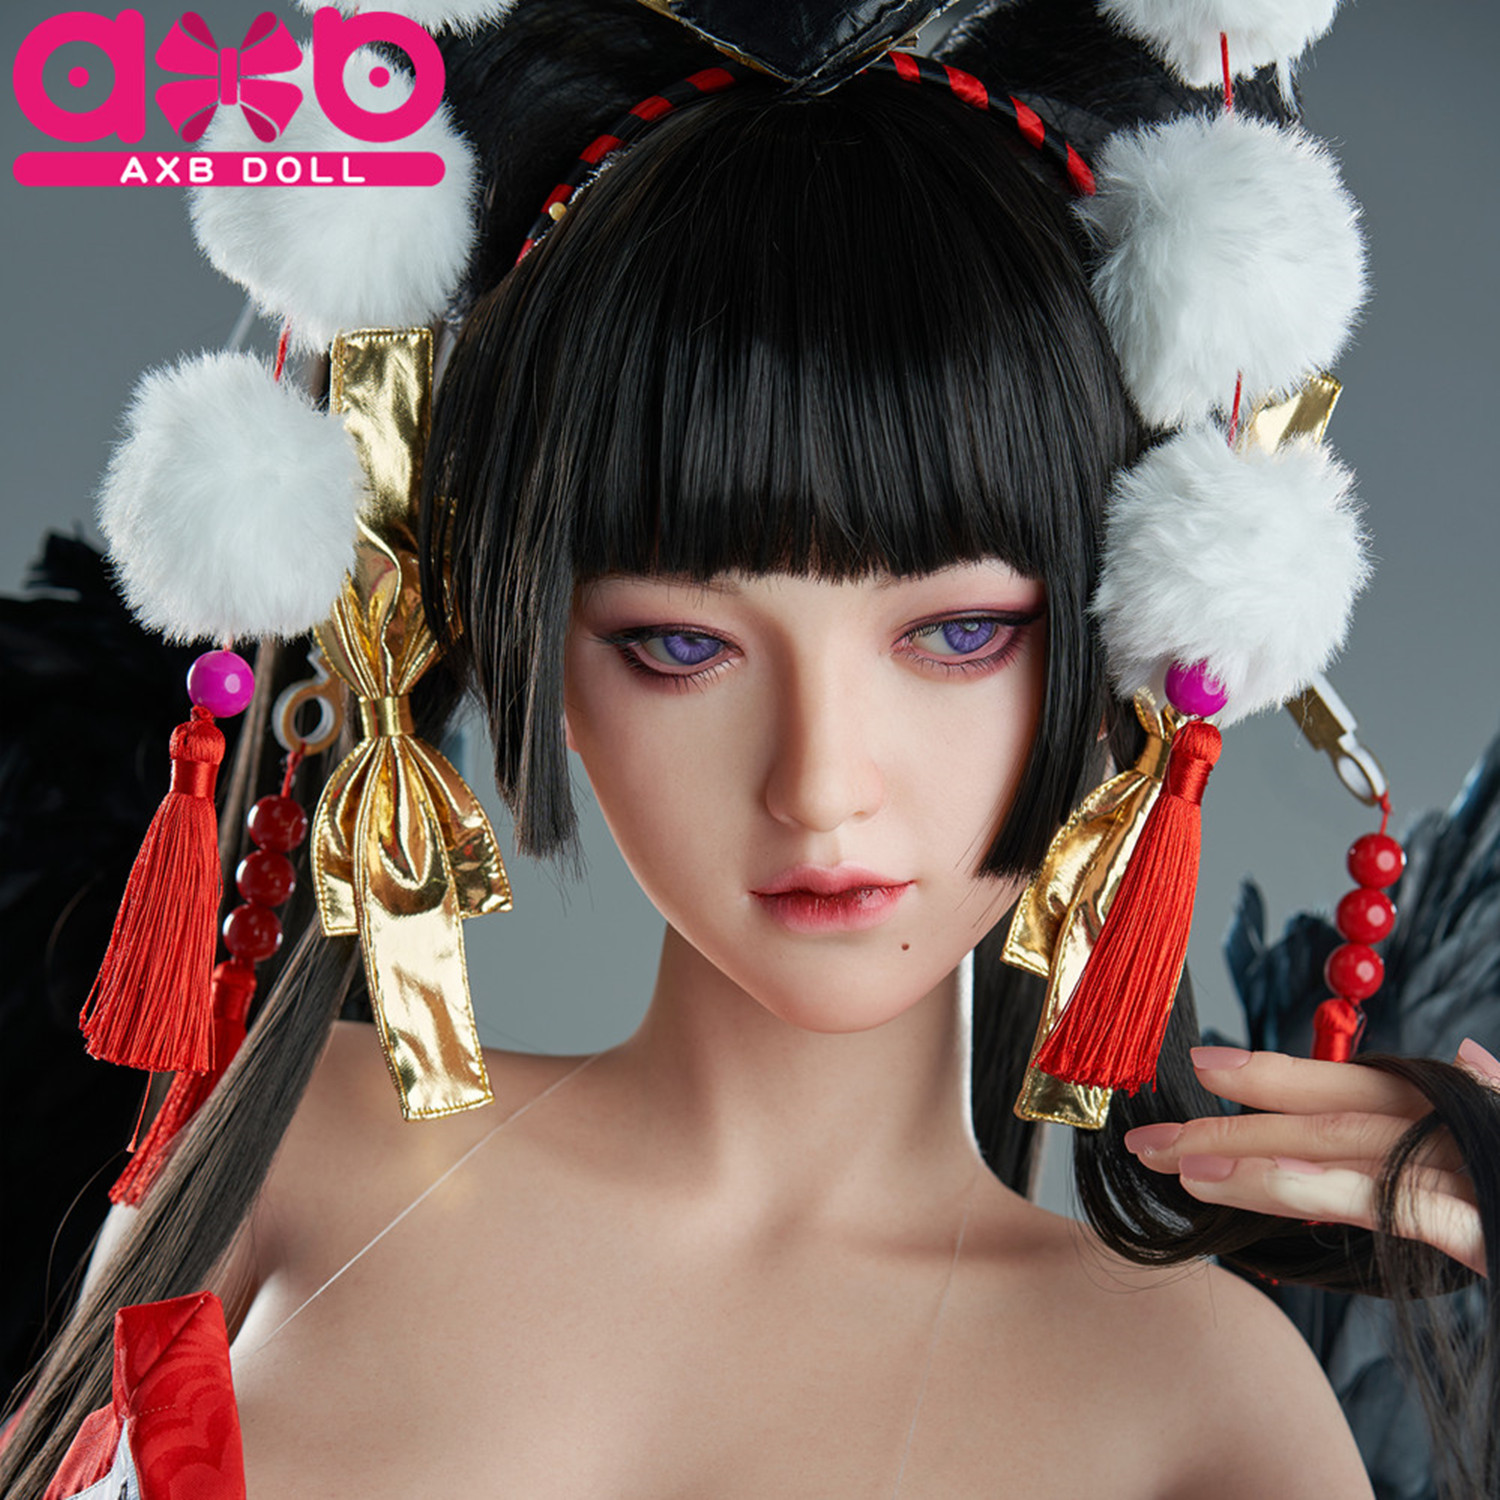 AXBDOLL GE44 Head - Click Image to Close